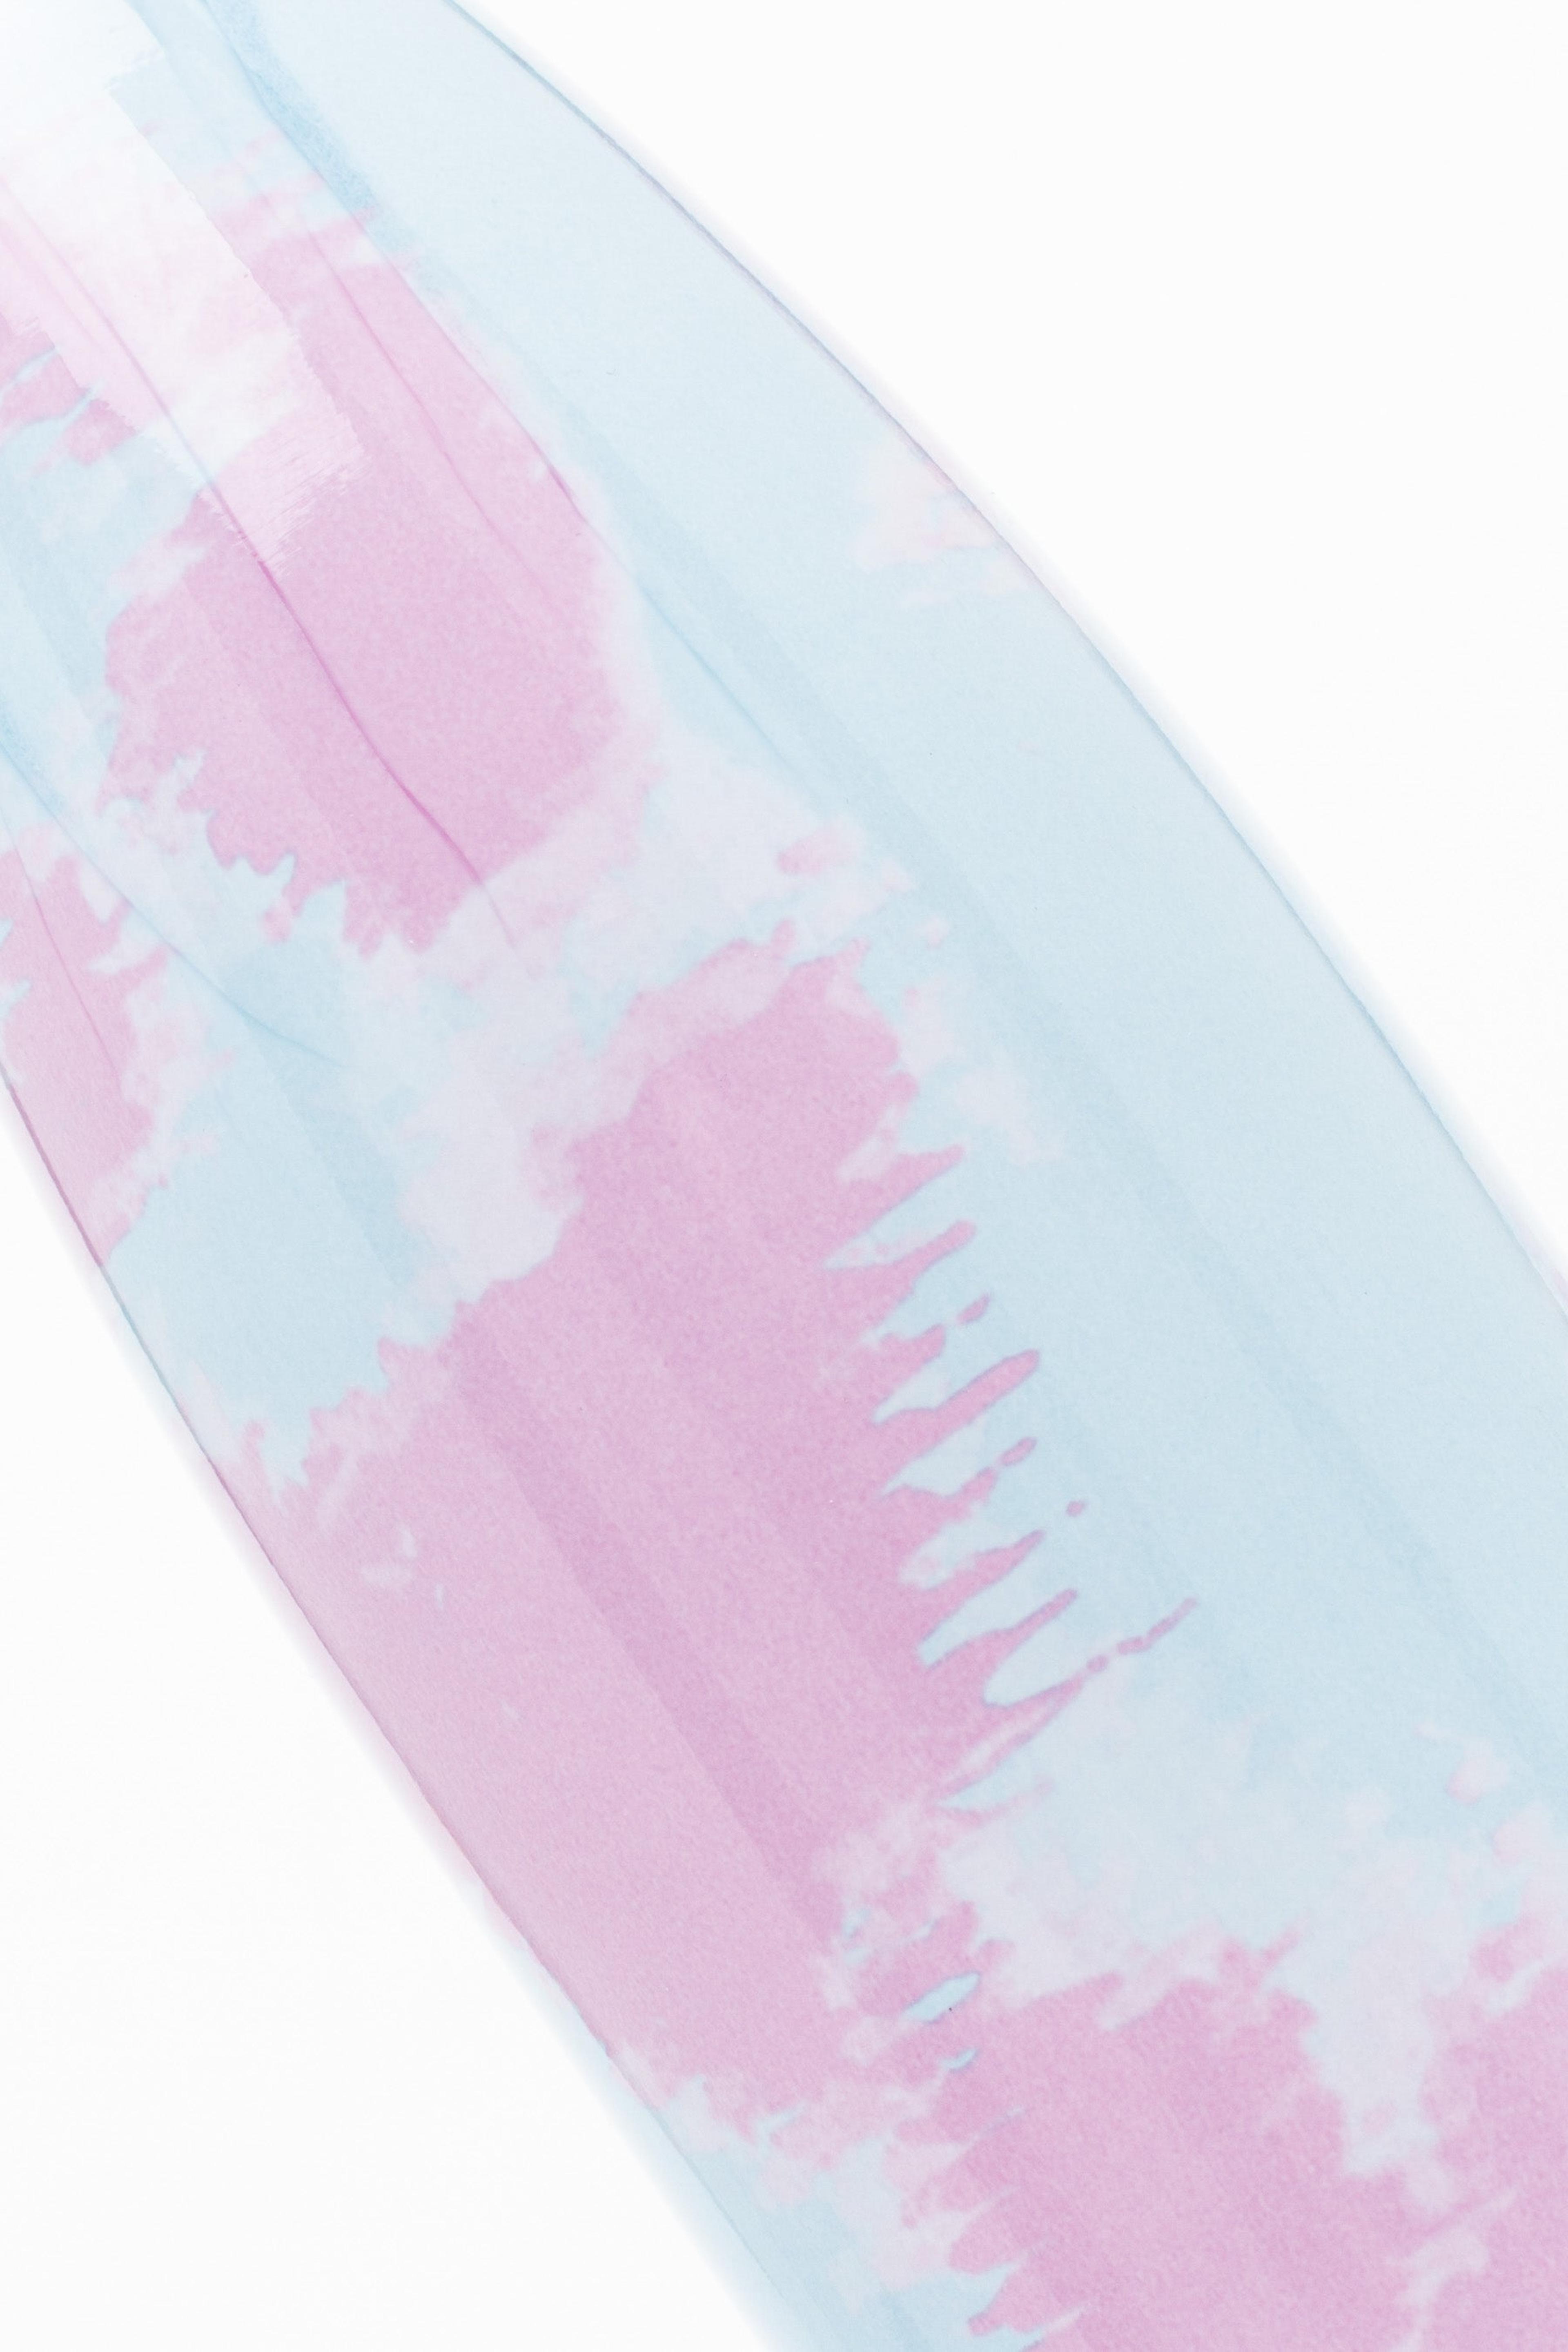 Alternate View 6 of HYPE UNISEX SPLODGE TIE DYE BLUE AND LILAC CREST BOTTLE